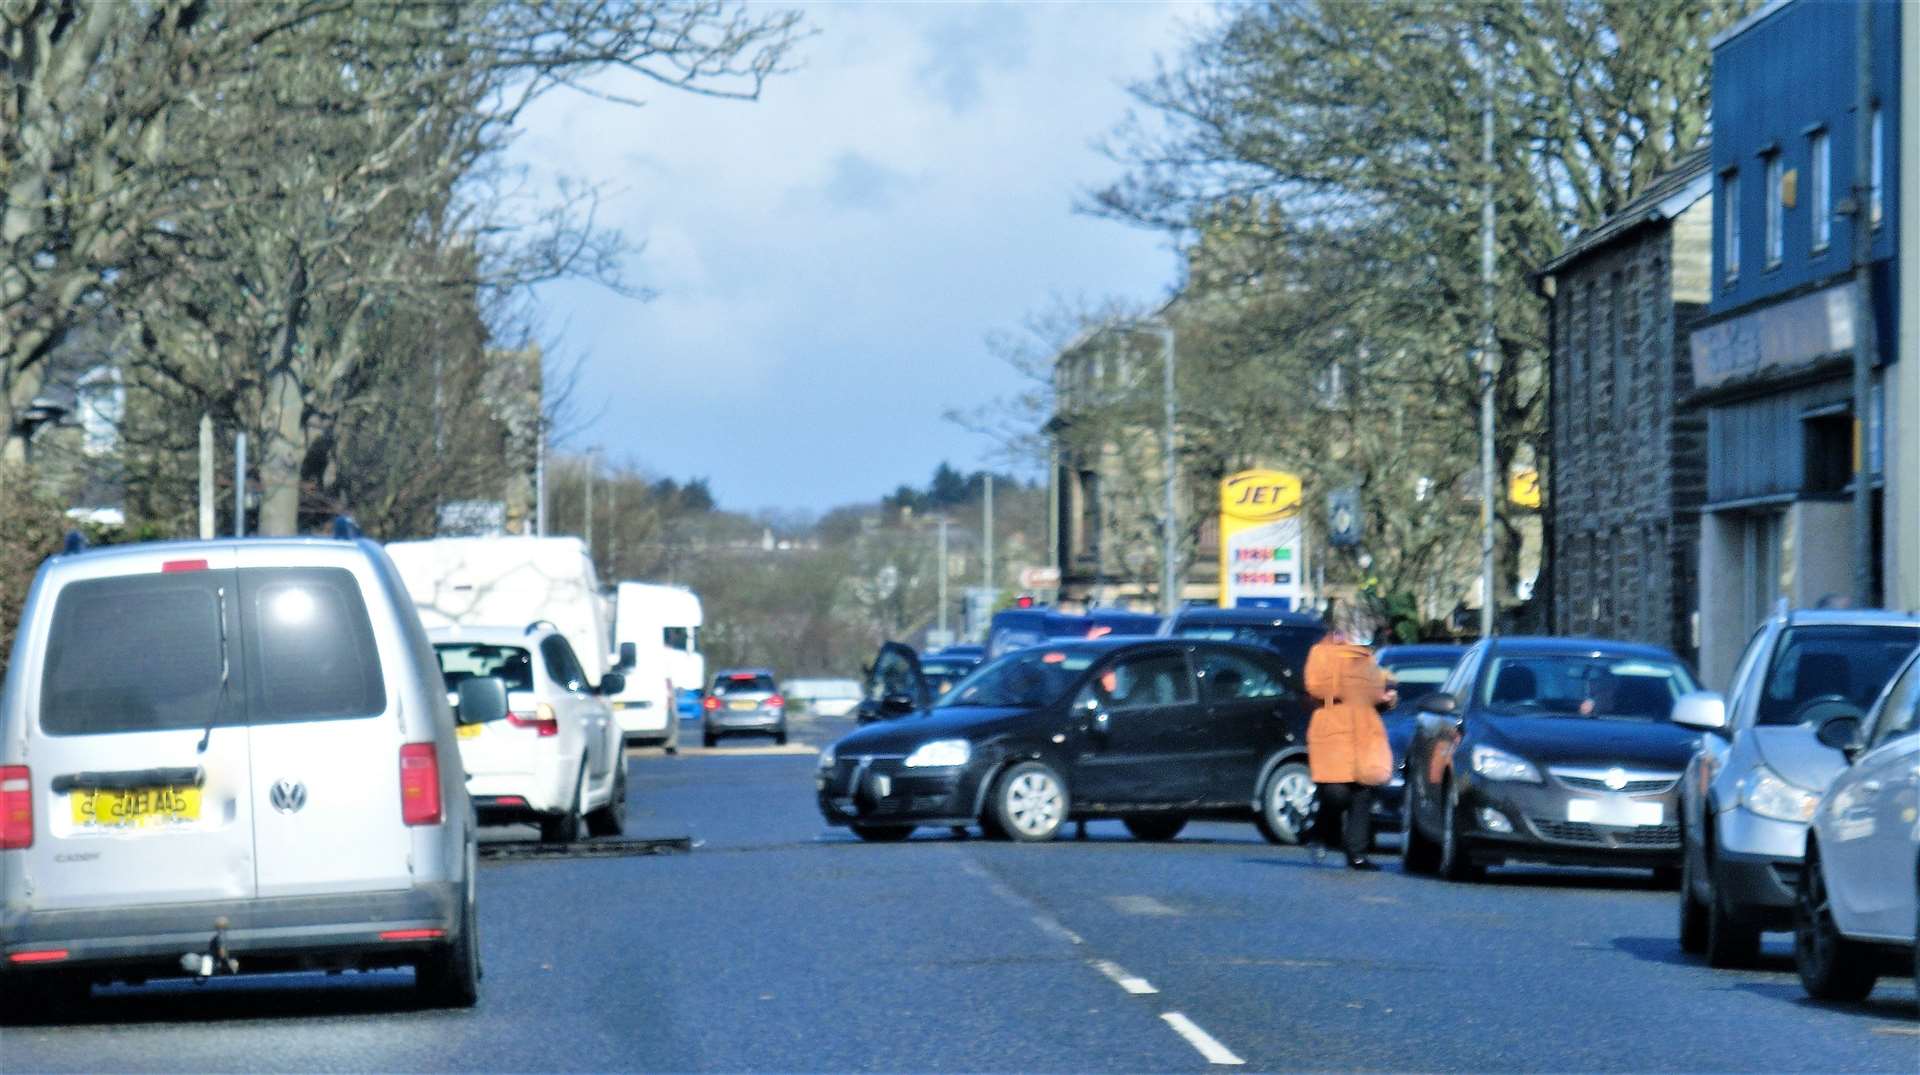 What appeared to be a minor road accident occurred in Wick today. Picture: A Morrison